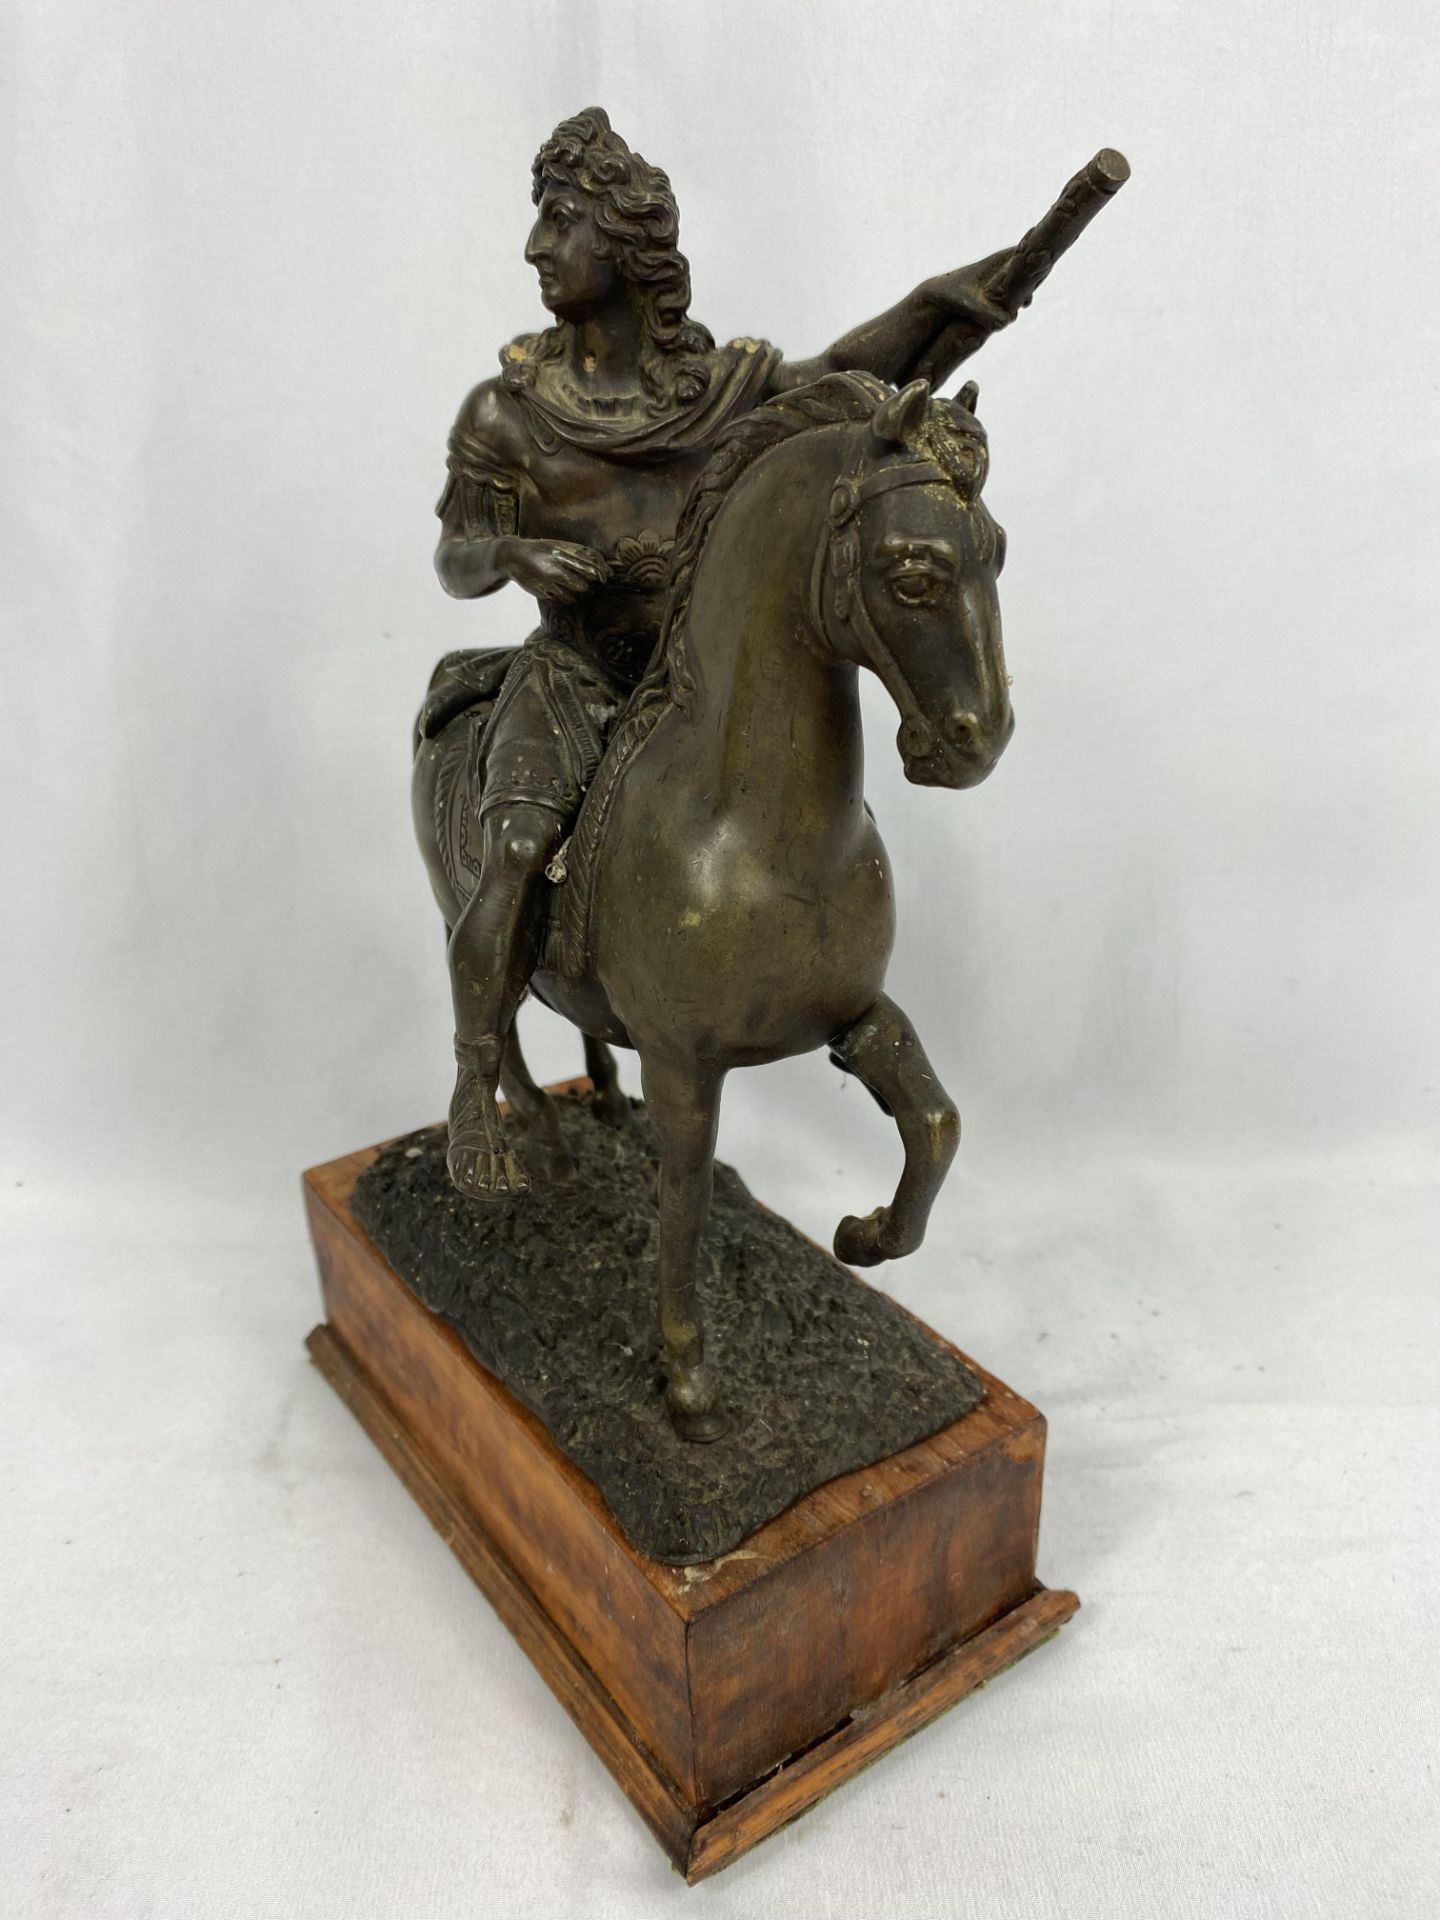 Bronzed figure of a classical soldier on horseback. From the Estate of Dame Mary Quant - Image 2 of 3